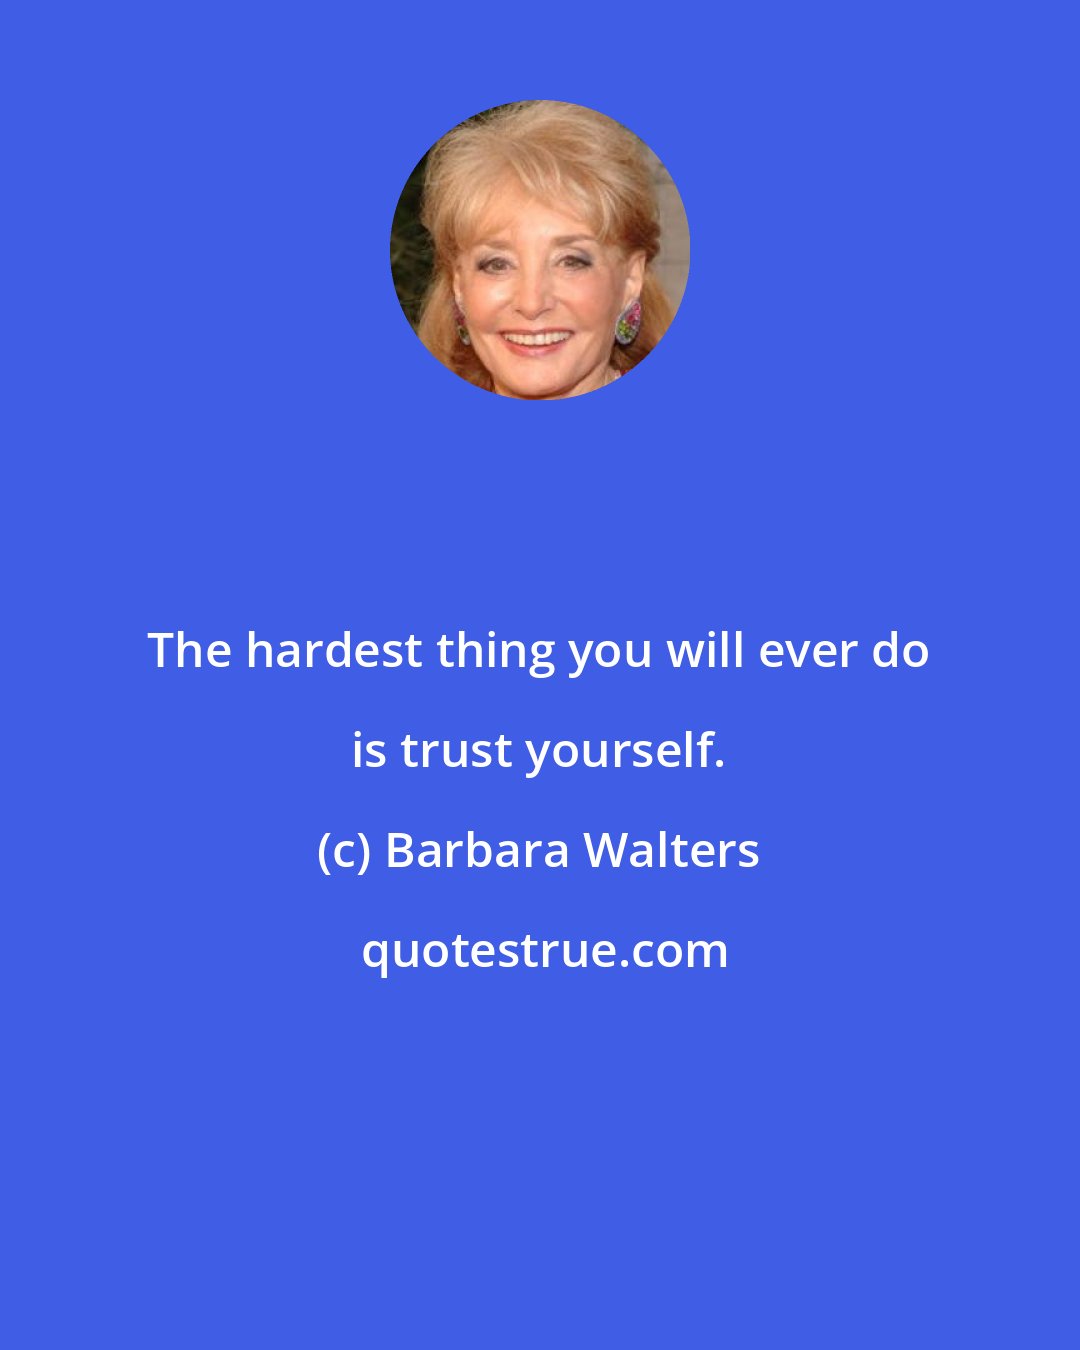 Barbara Walters: The hardest thing you will ever do is trust yourself.